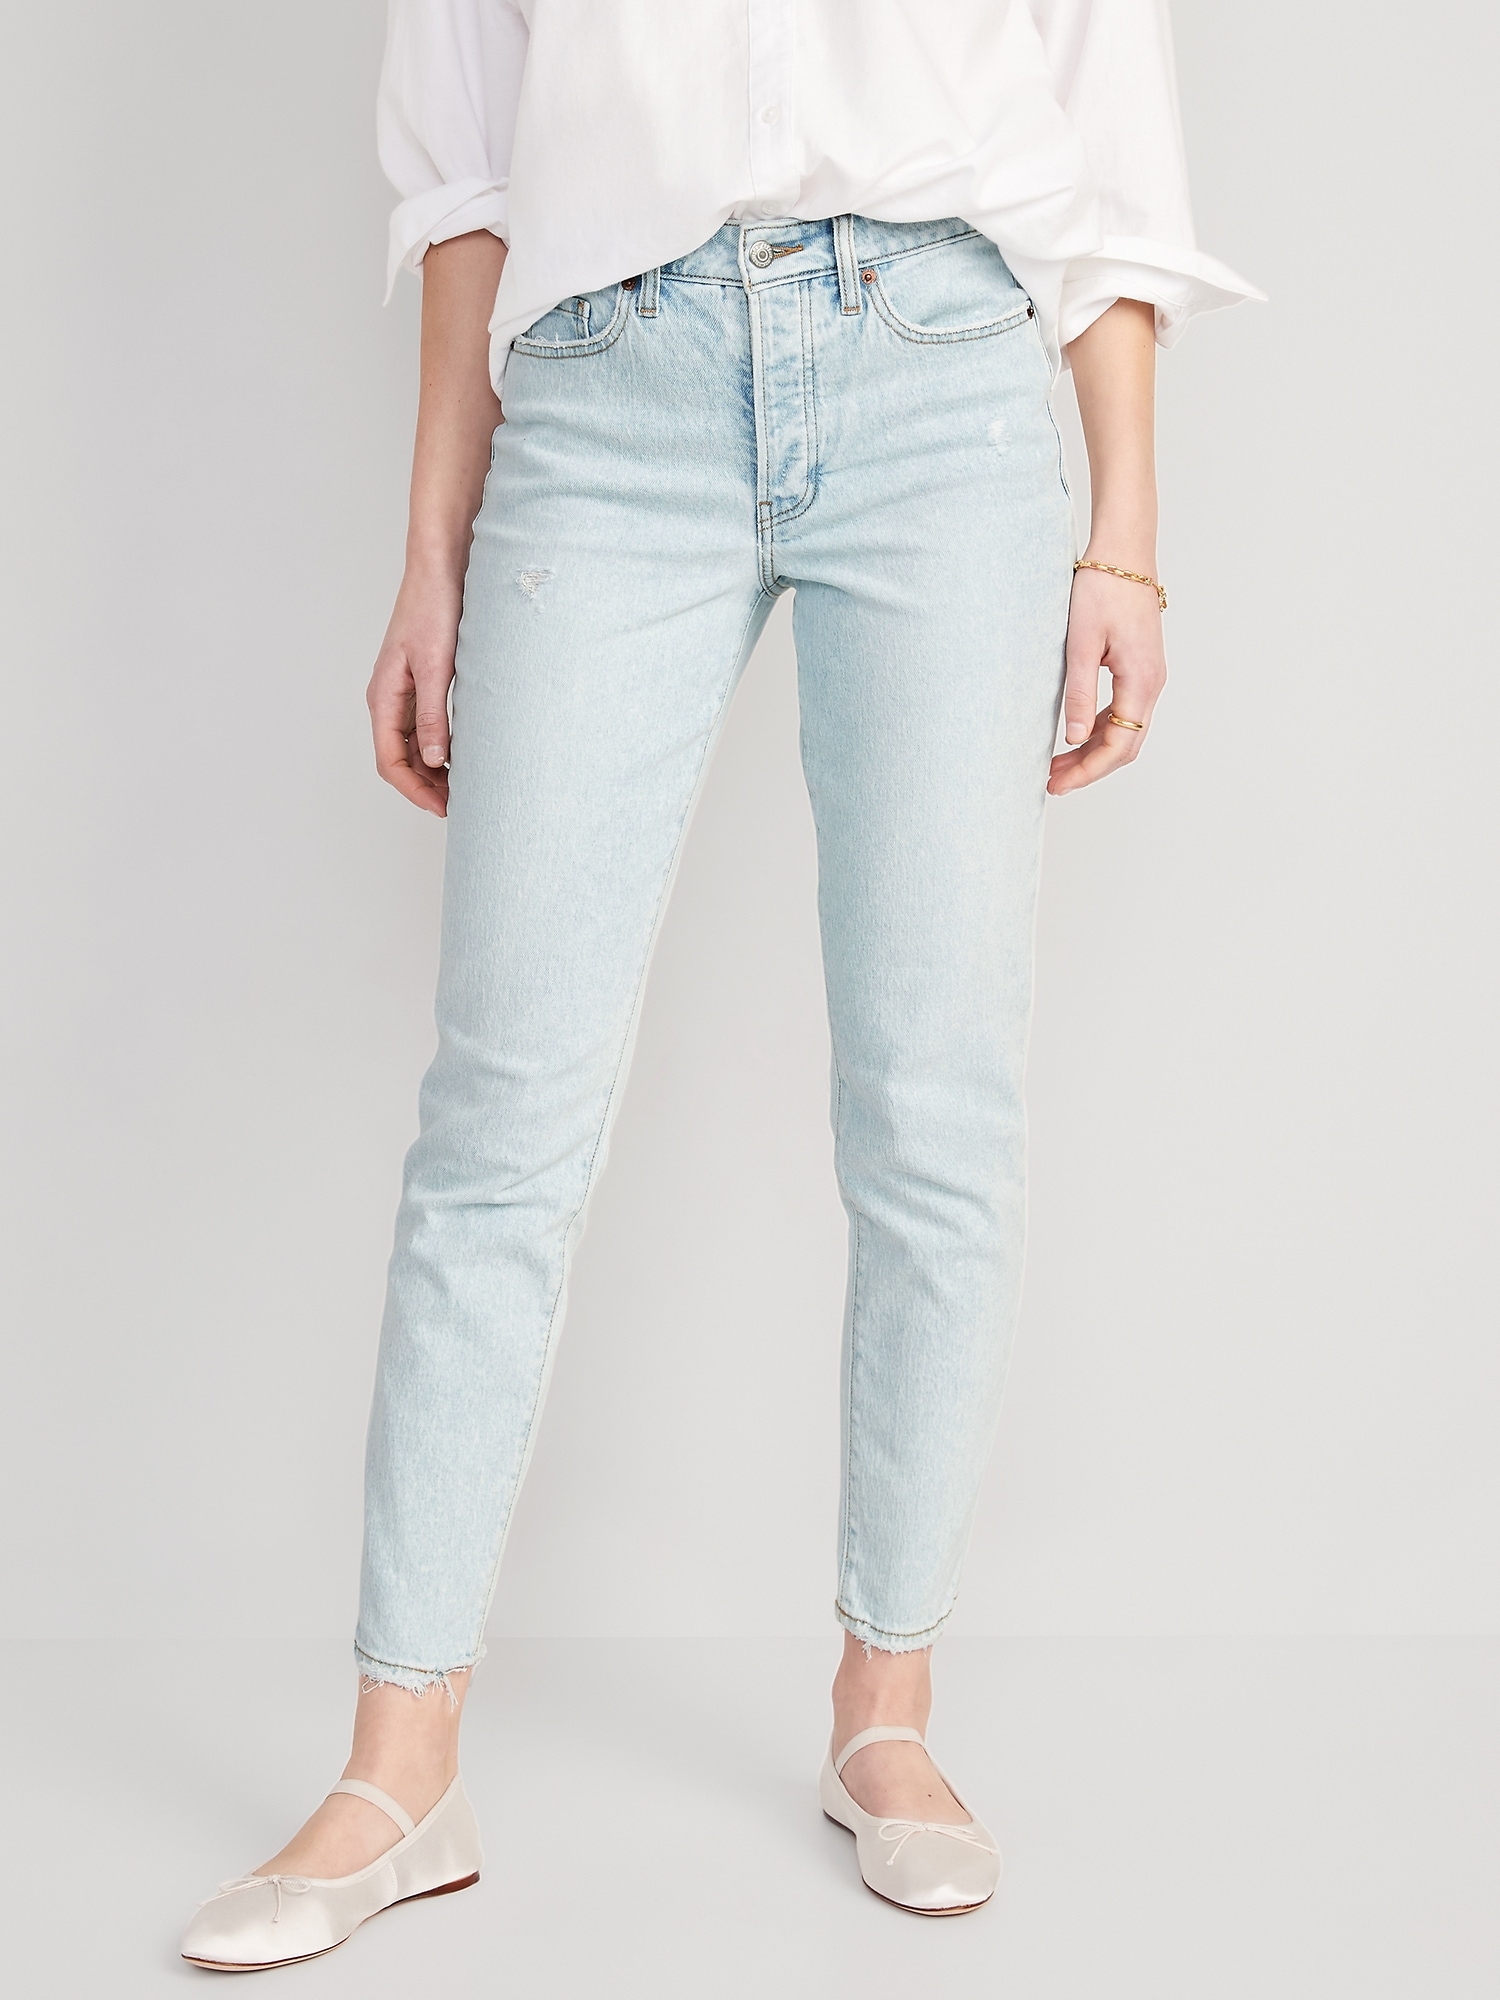 Old Navy High-Waisted OG Straight Ripped Ankle Jeans for Women